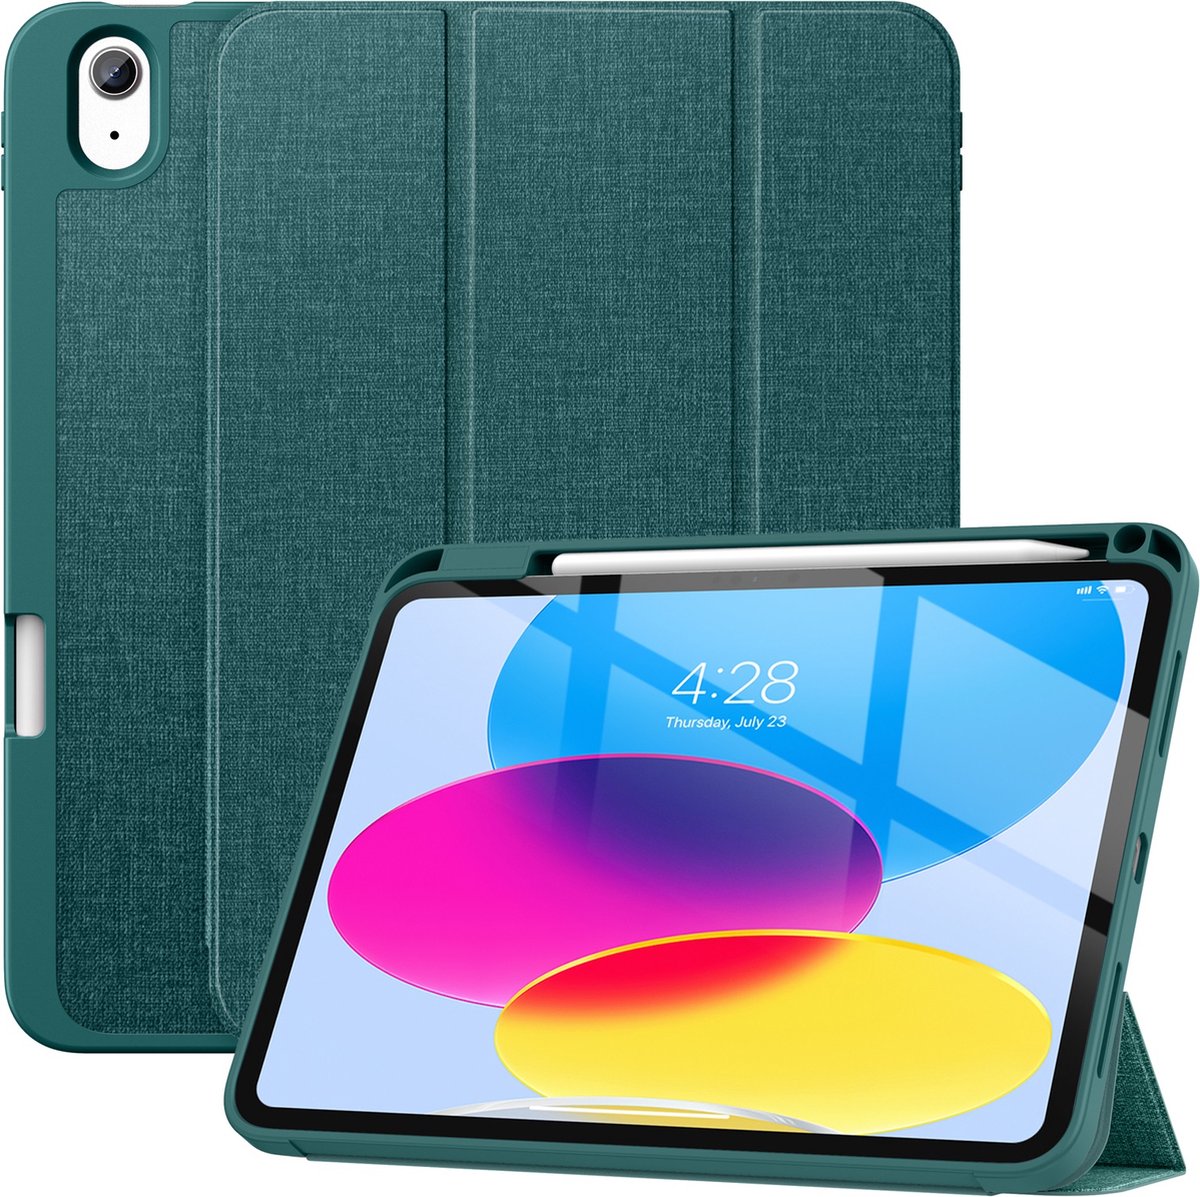 iPad Hoes 10e generatie - iPad 2022 Hoes - iPad 10.9 Inch Hoes - Solidenz iPad 10.9 Trifold Bookcase - Case Met Autowake - Hoes Met Pencil Houder - Groenblauw